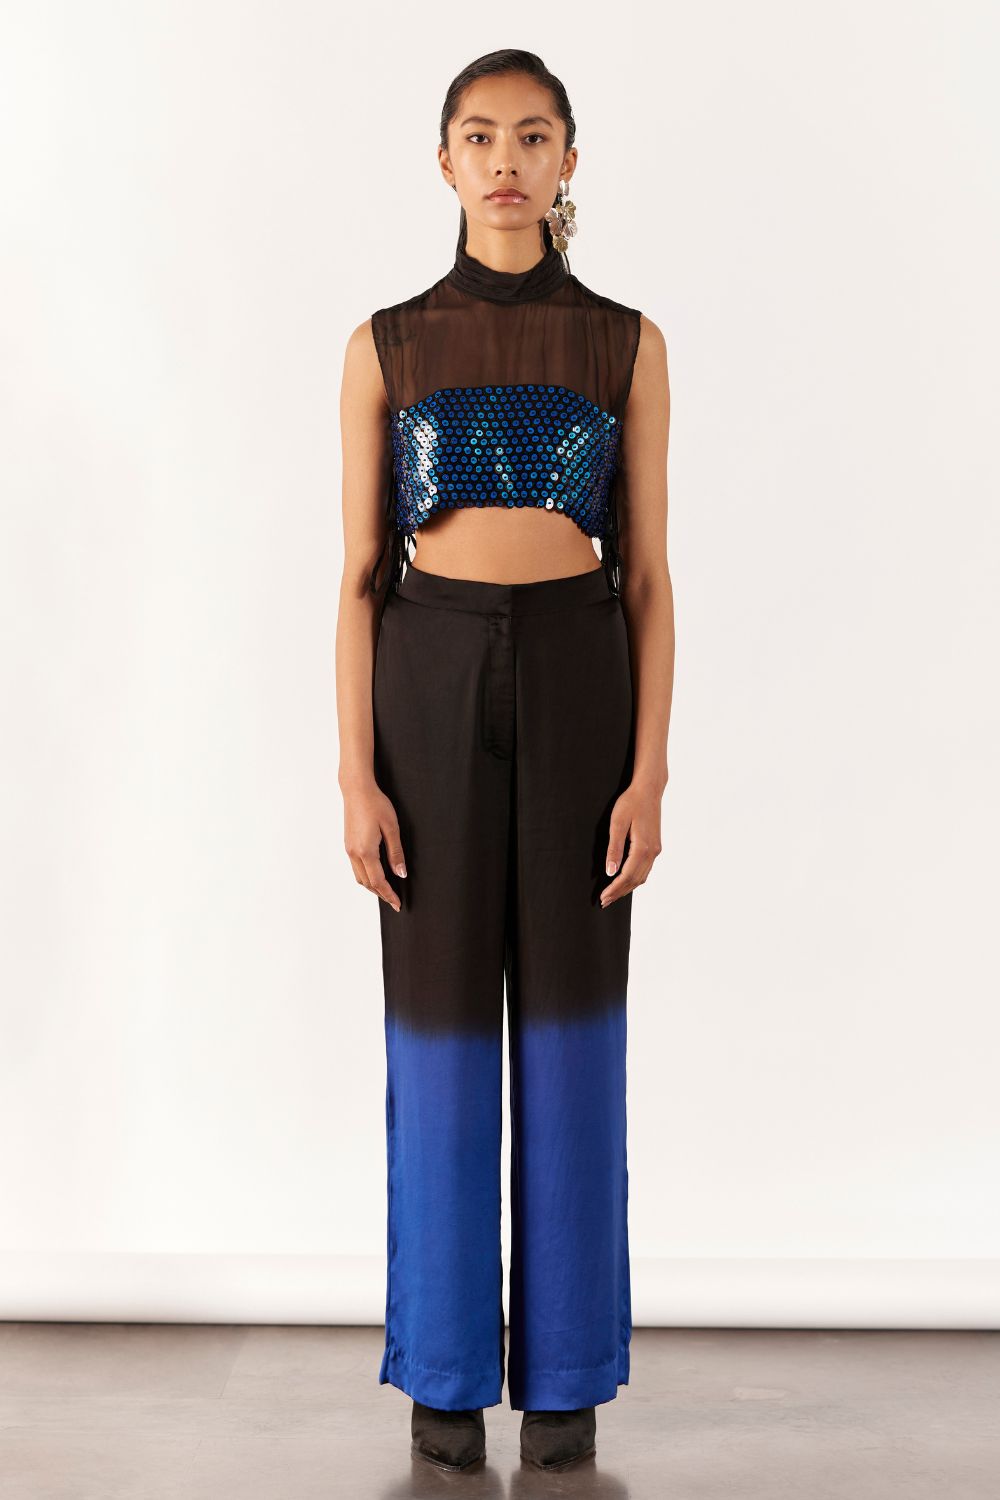 Firefly Top With Blue/ Black Ombre Pants Set